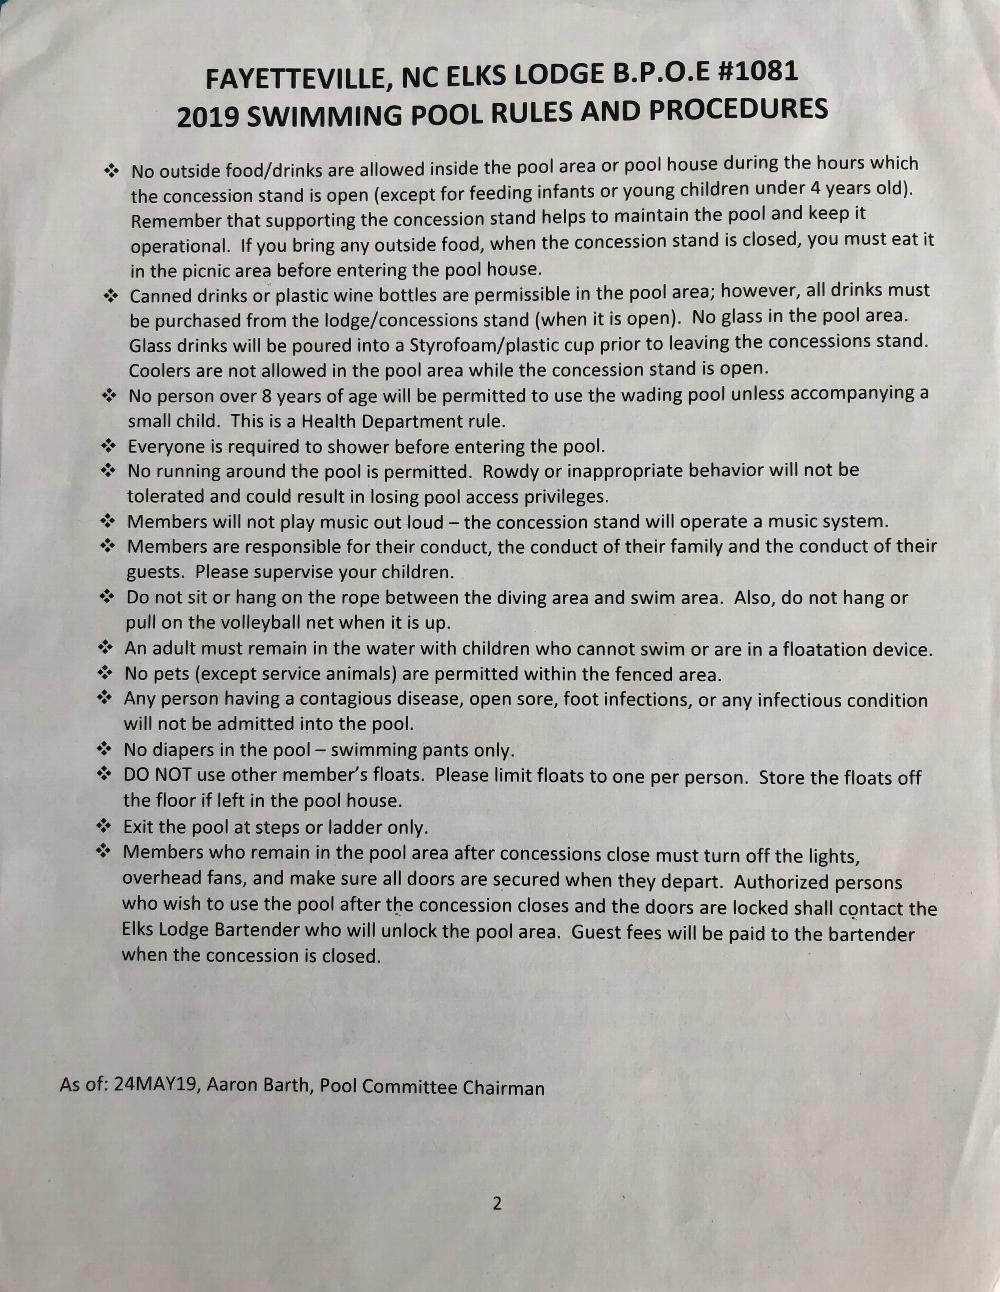 2019 Swimming Pool Rules (2 of 2)